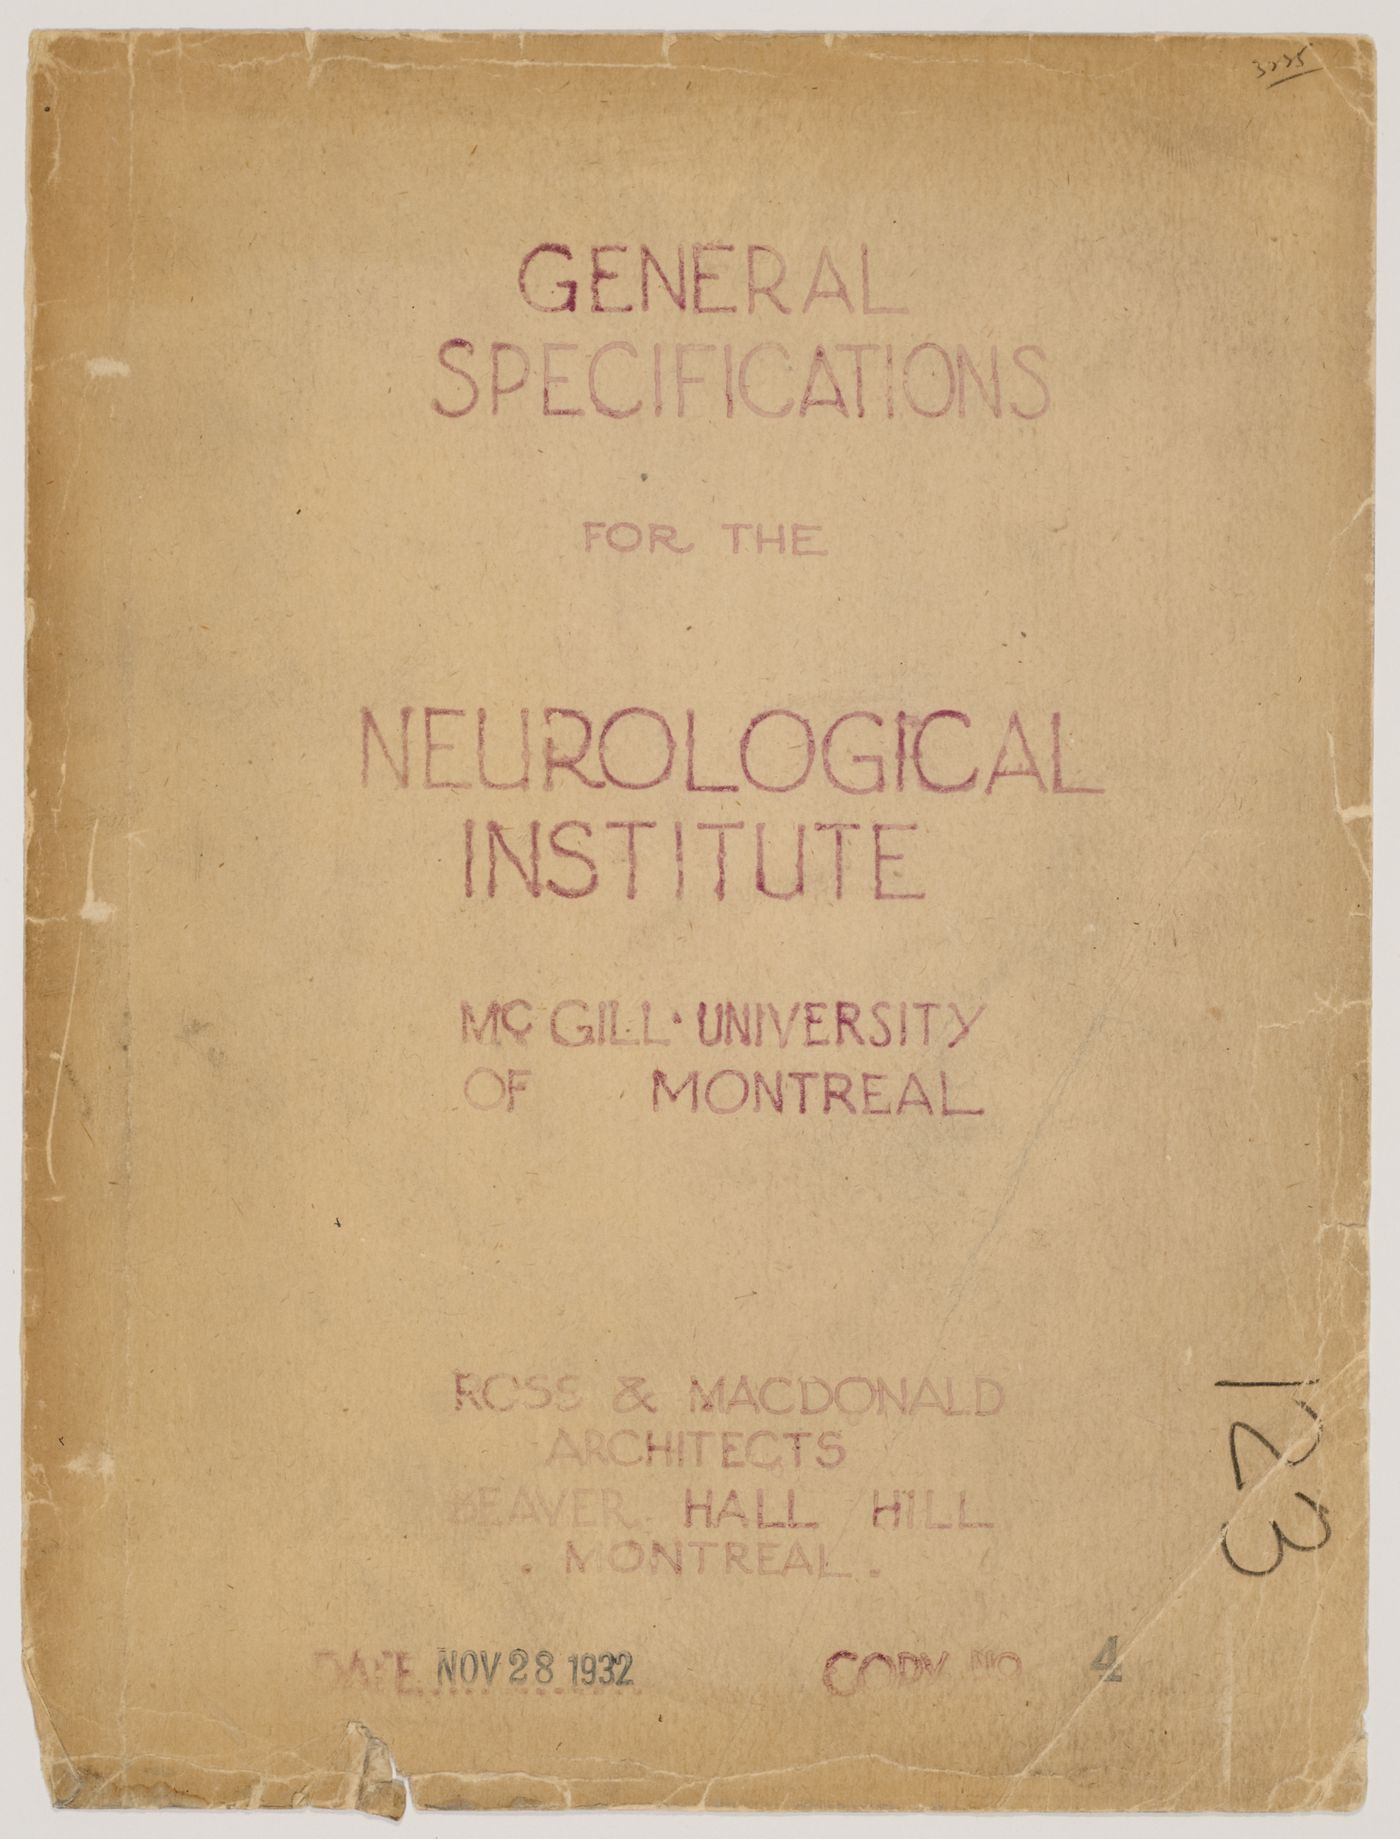 "General Specifications for the Neurological Institute, McGill University of Montreal"